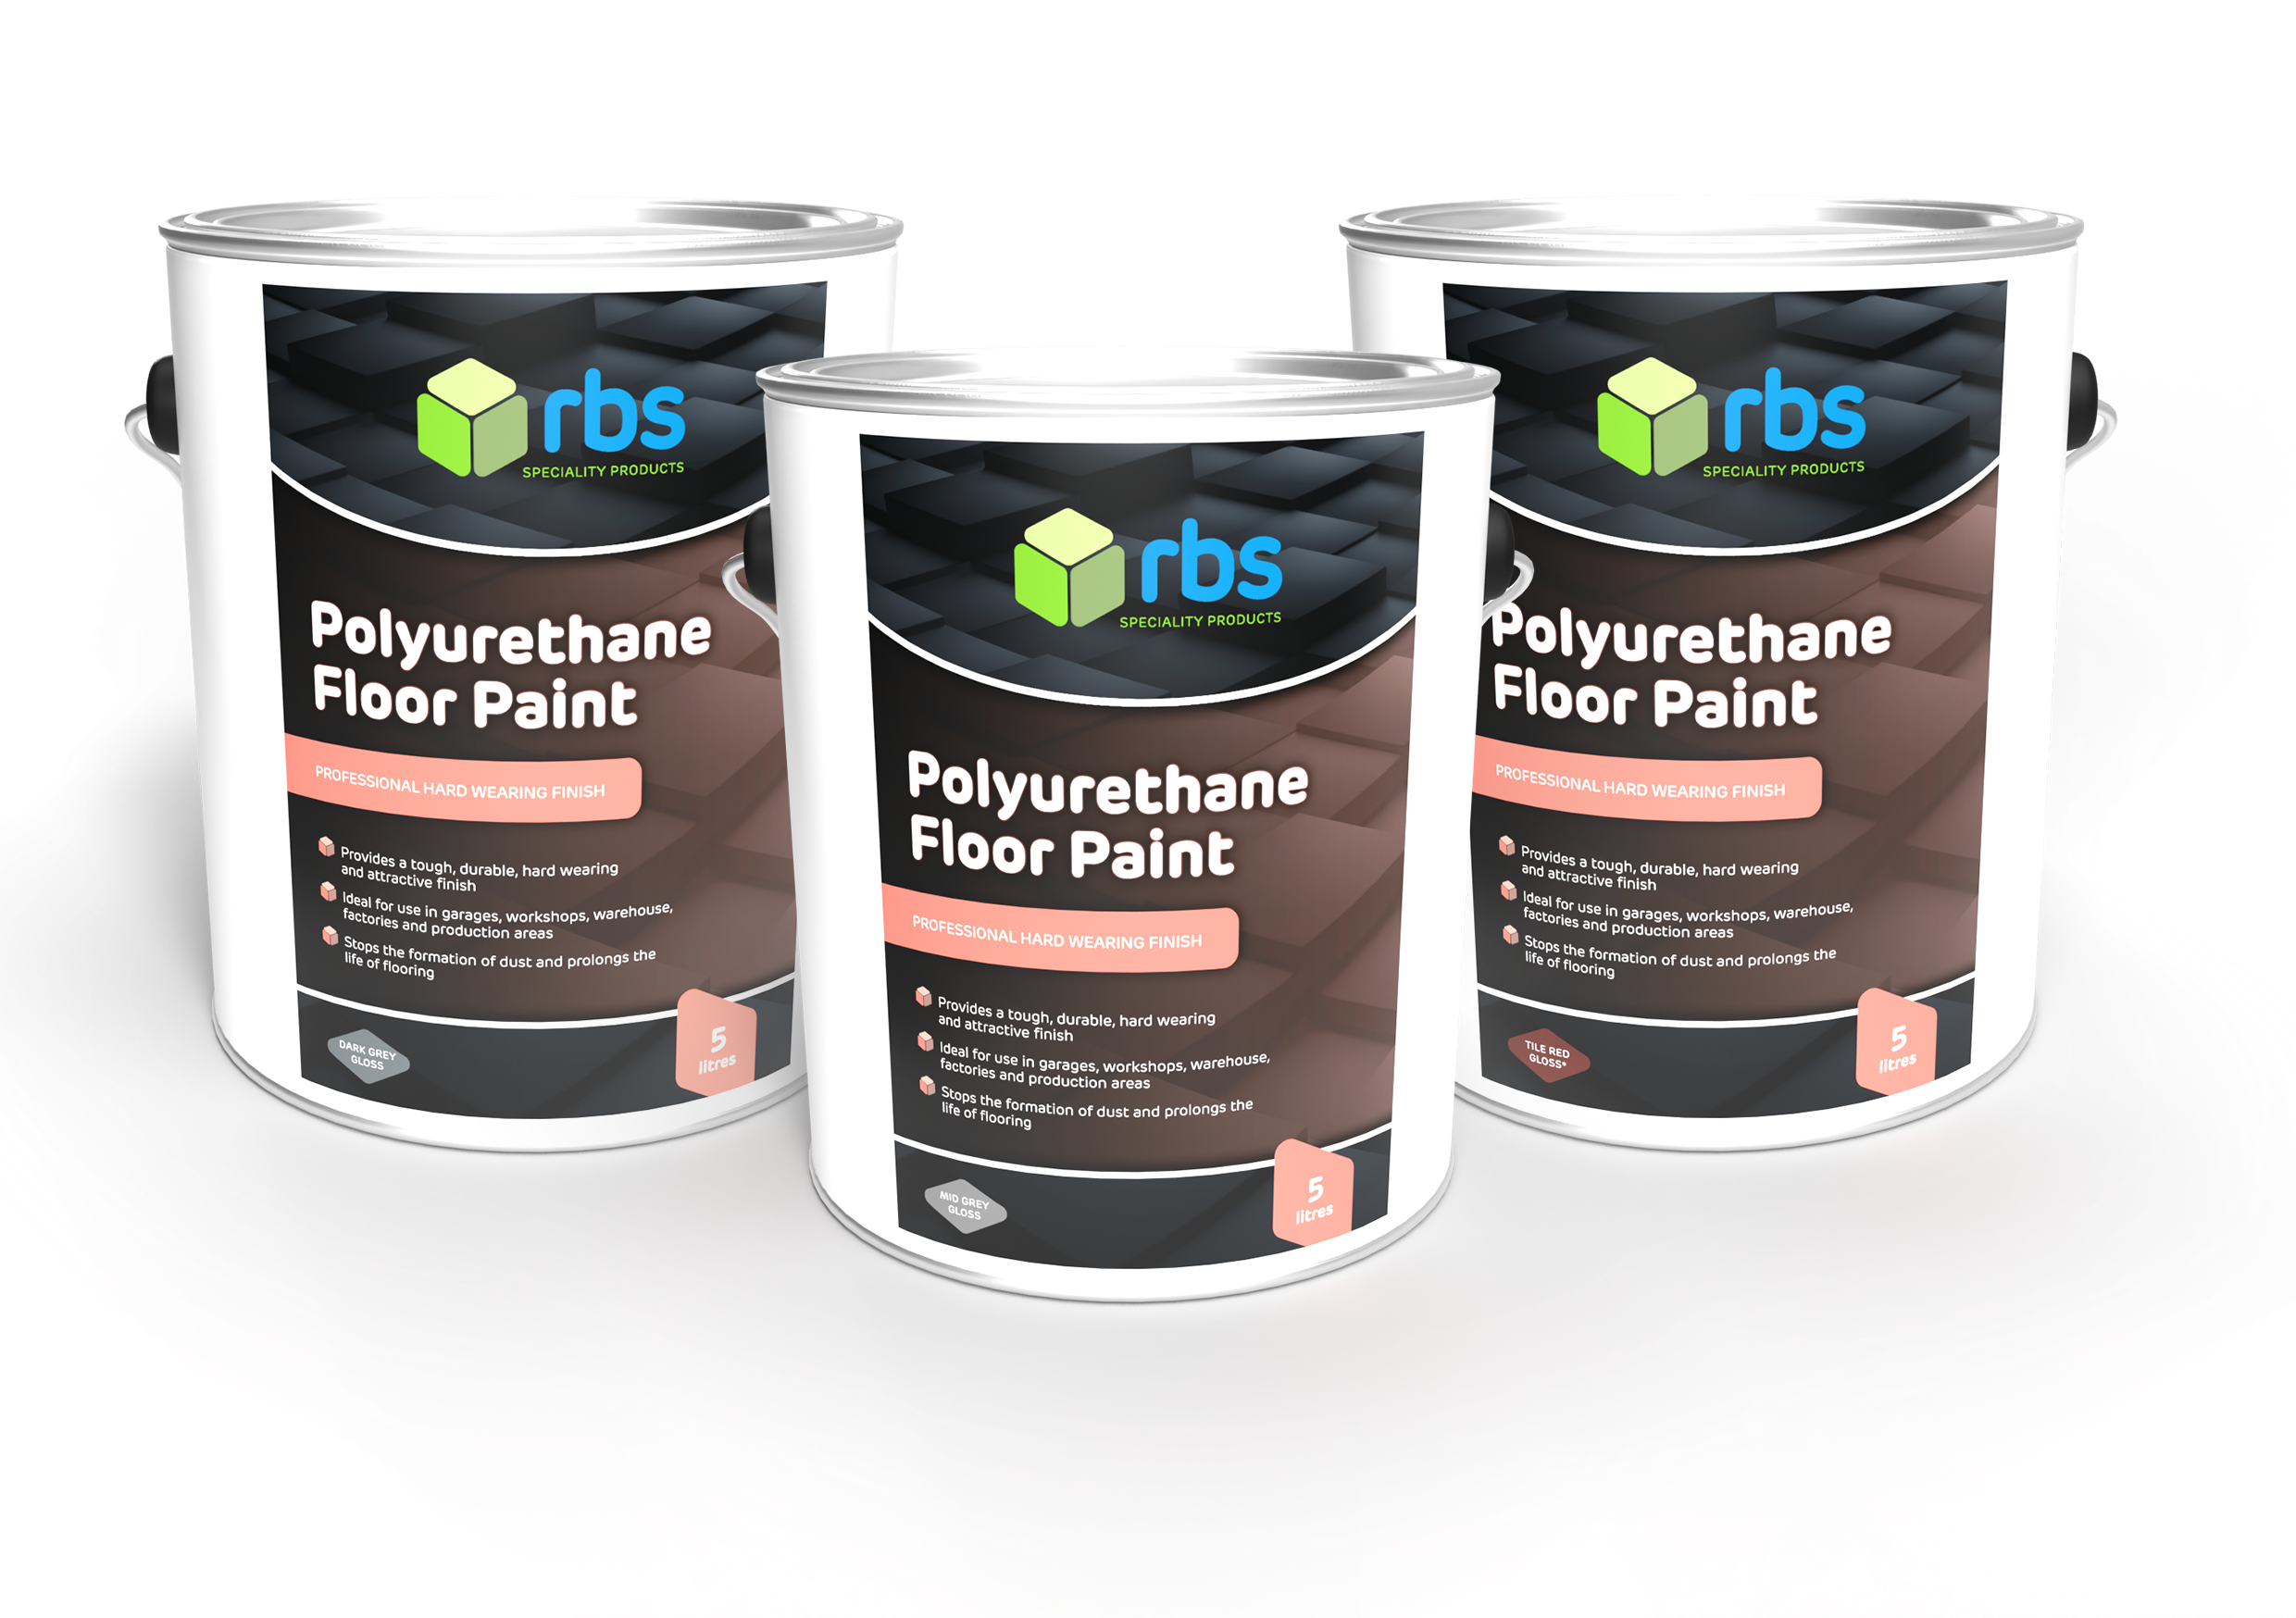 rbs Polyurethane Floor Paint - prepare to be floored by this quality product